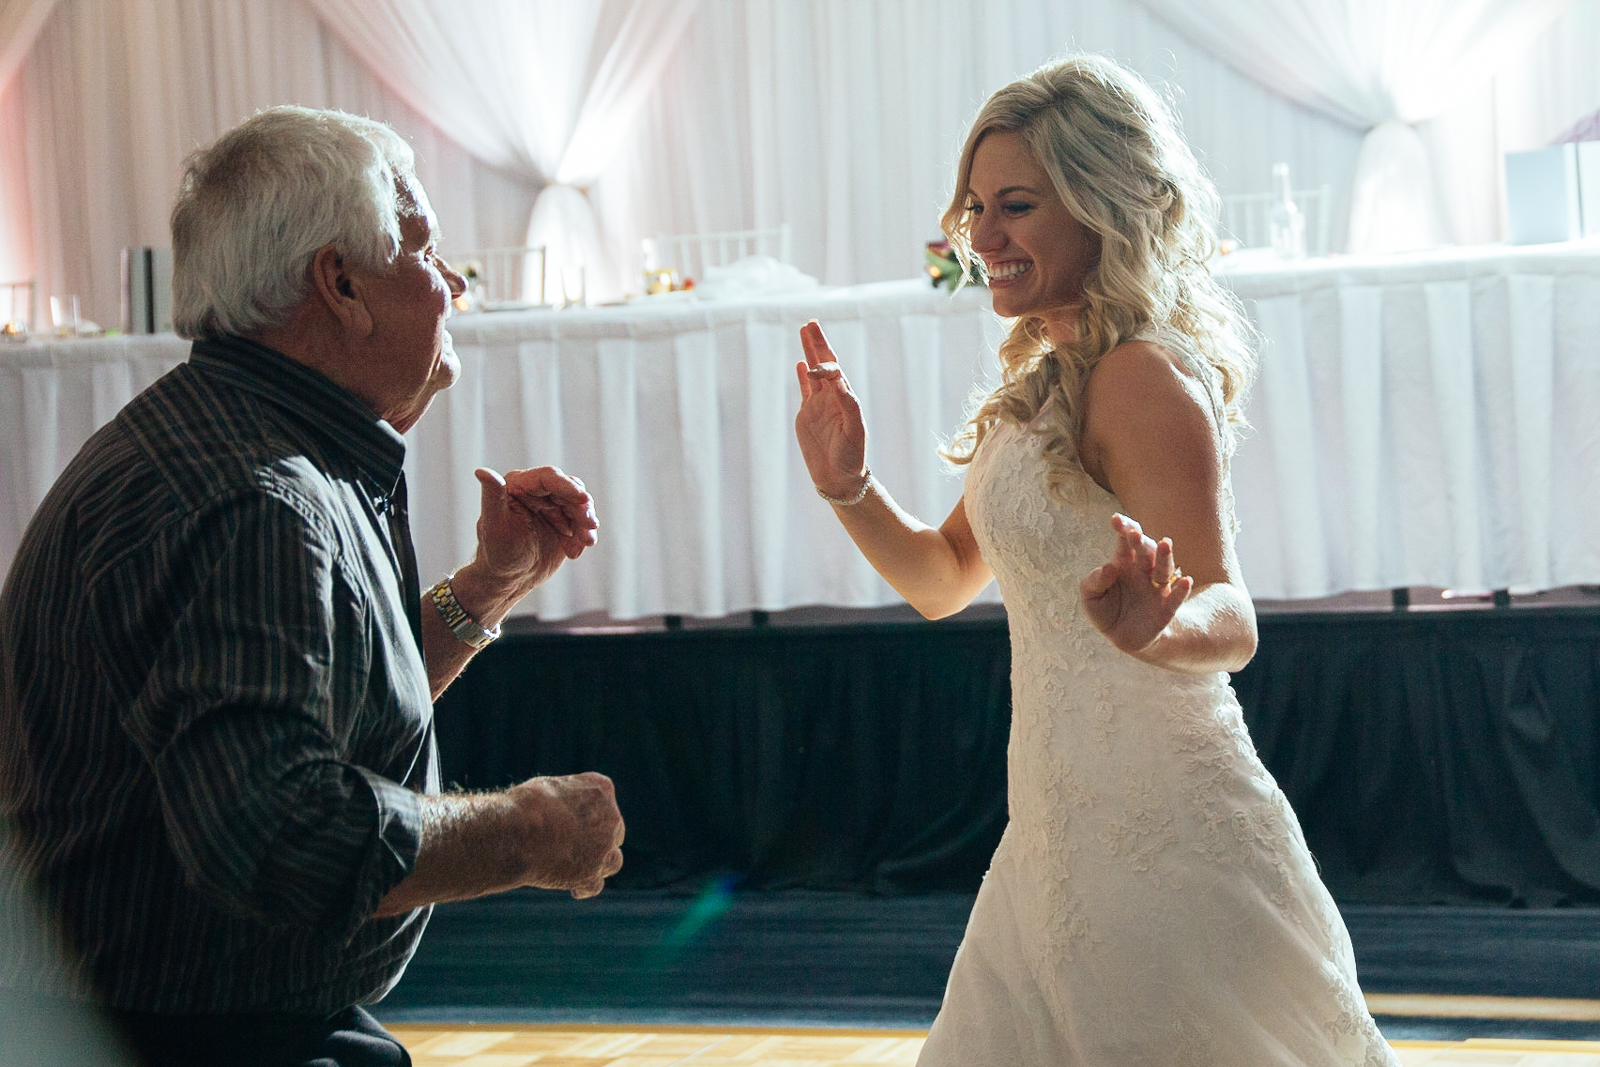 A Quick Father/Daughter Dance